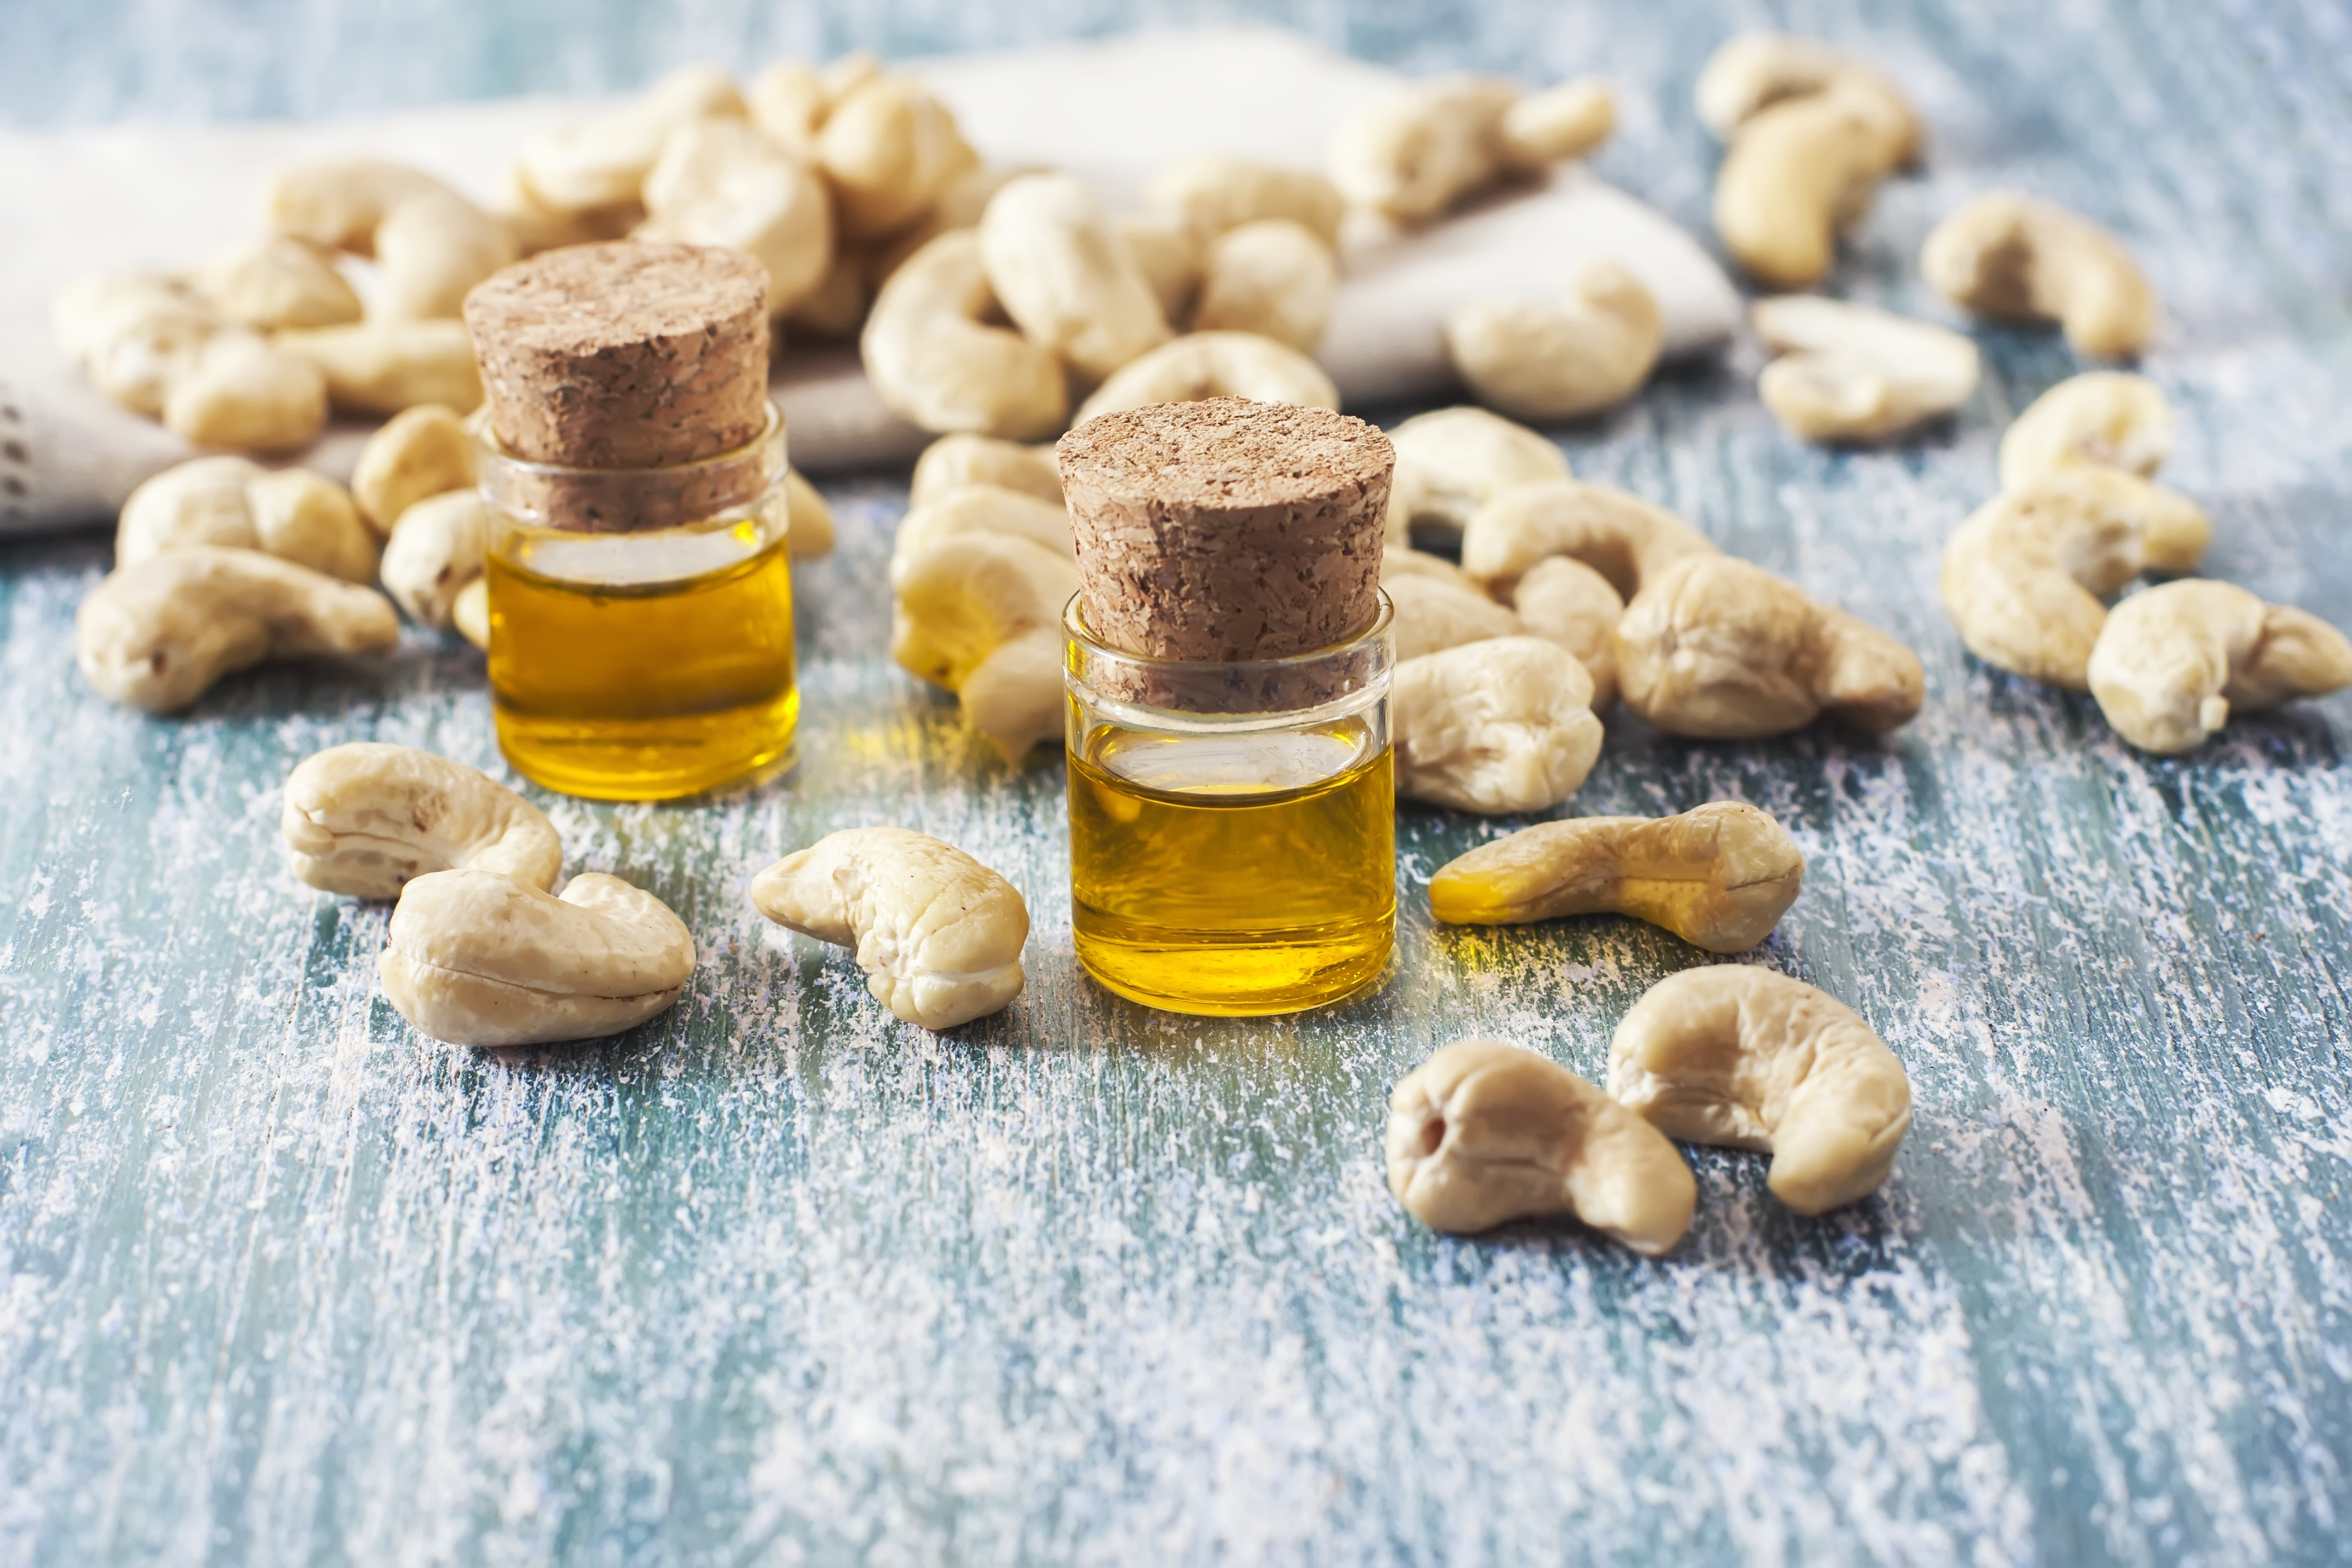 Cashew Nut Oil Uses That Can Help You